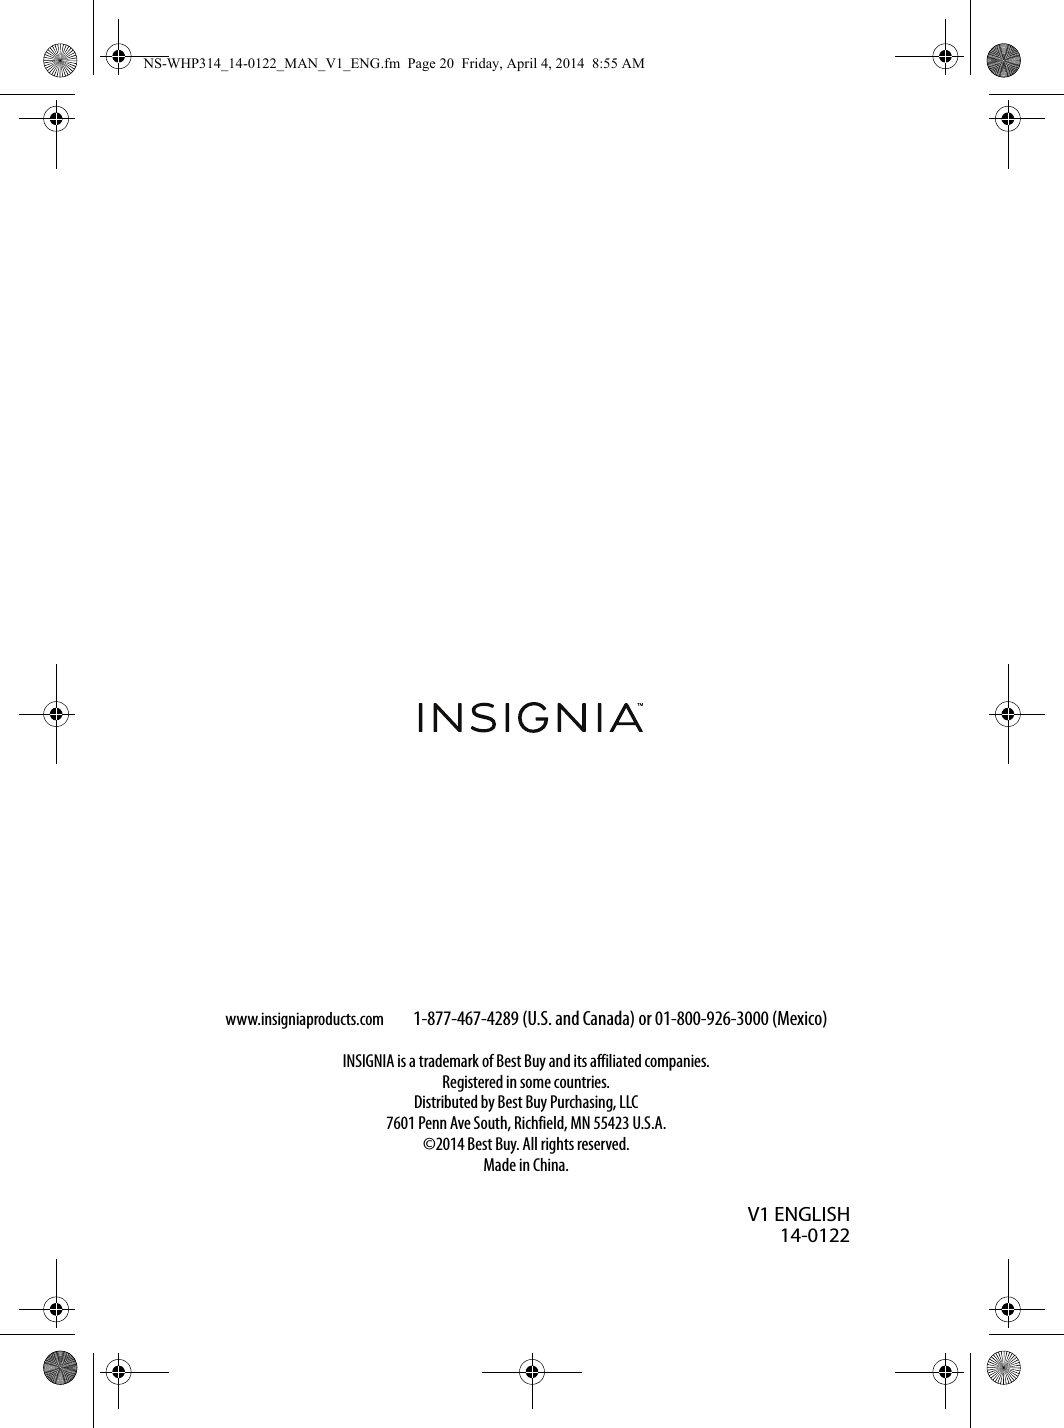 www.insigniaproducts.com1-877-467-4289 (U.S. and Canada) or 01-800-926-3000 (Mexico)INSIGNIA is a trademark of Best Buy and its affiliated companies.Registered in some countries.Distributed by Best Buy Purchasing, LLC7601 Penn Ave South, Richfield, MN 55423 U.S.A.©2014 Best Buy. All rights reserved.Made in China.V1 ENGLISH14-0122NS-WHP314_14-0122_MAN_V1_ENG.fm  Page 20  Friday, April 4, 2014  8:55 AM